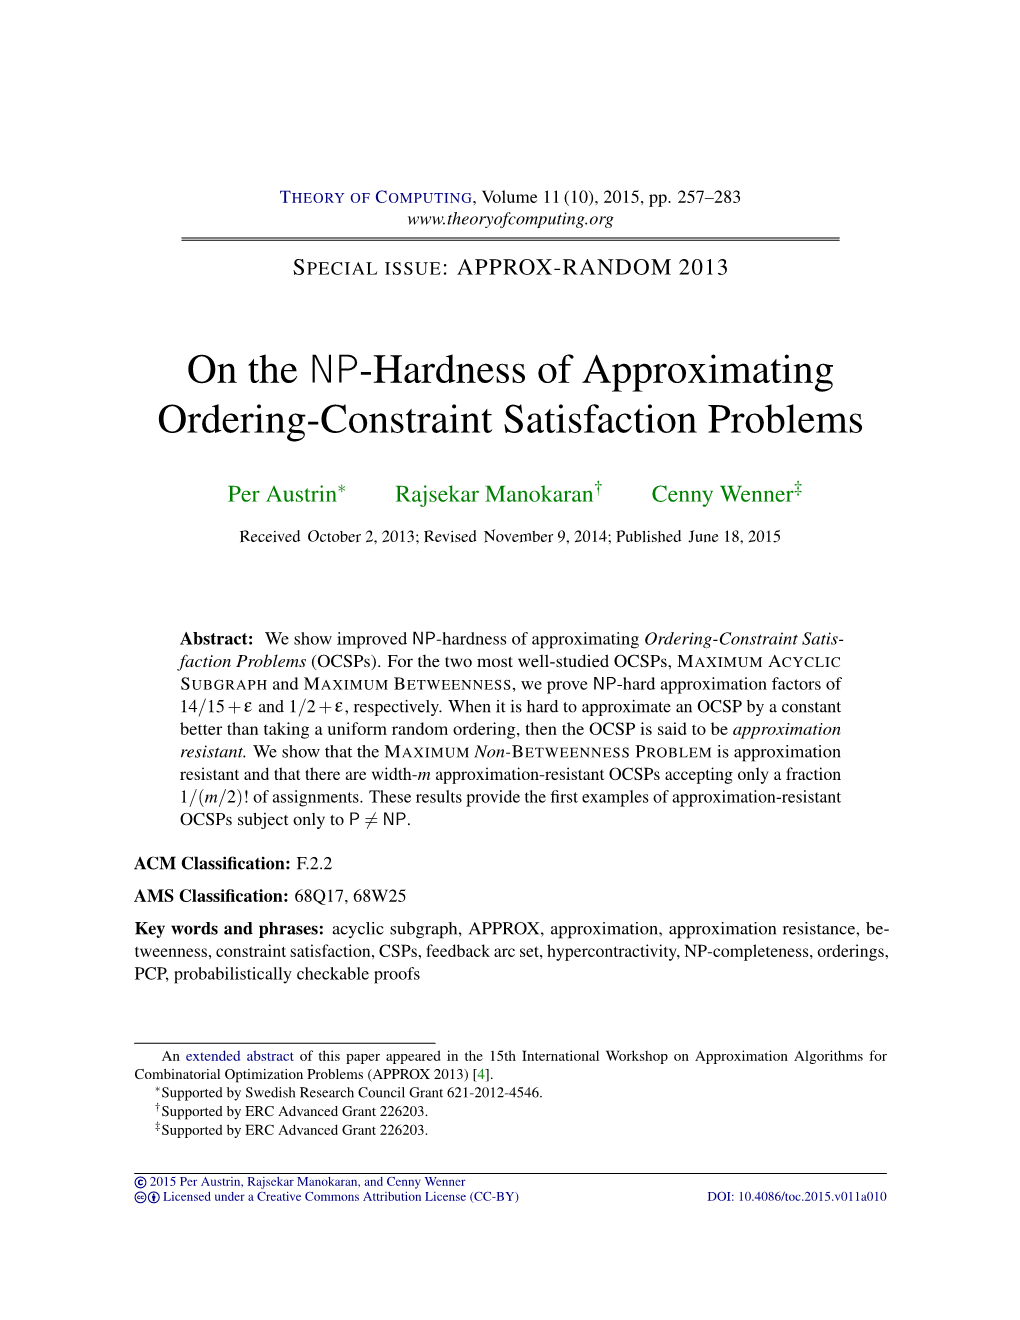 On the NP-Hardness of Approximating Ordering-Constraint Satisfaction Problems